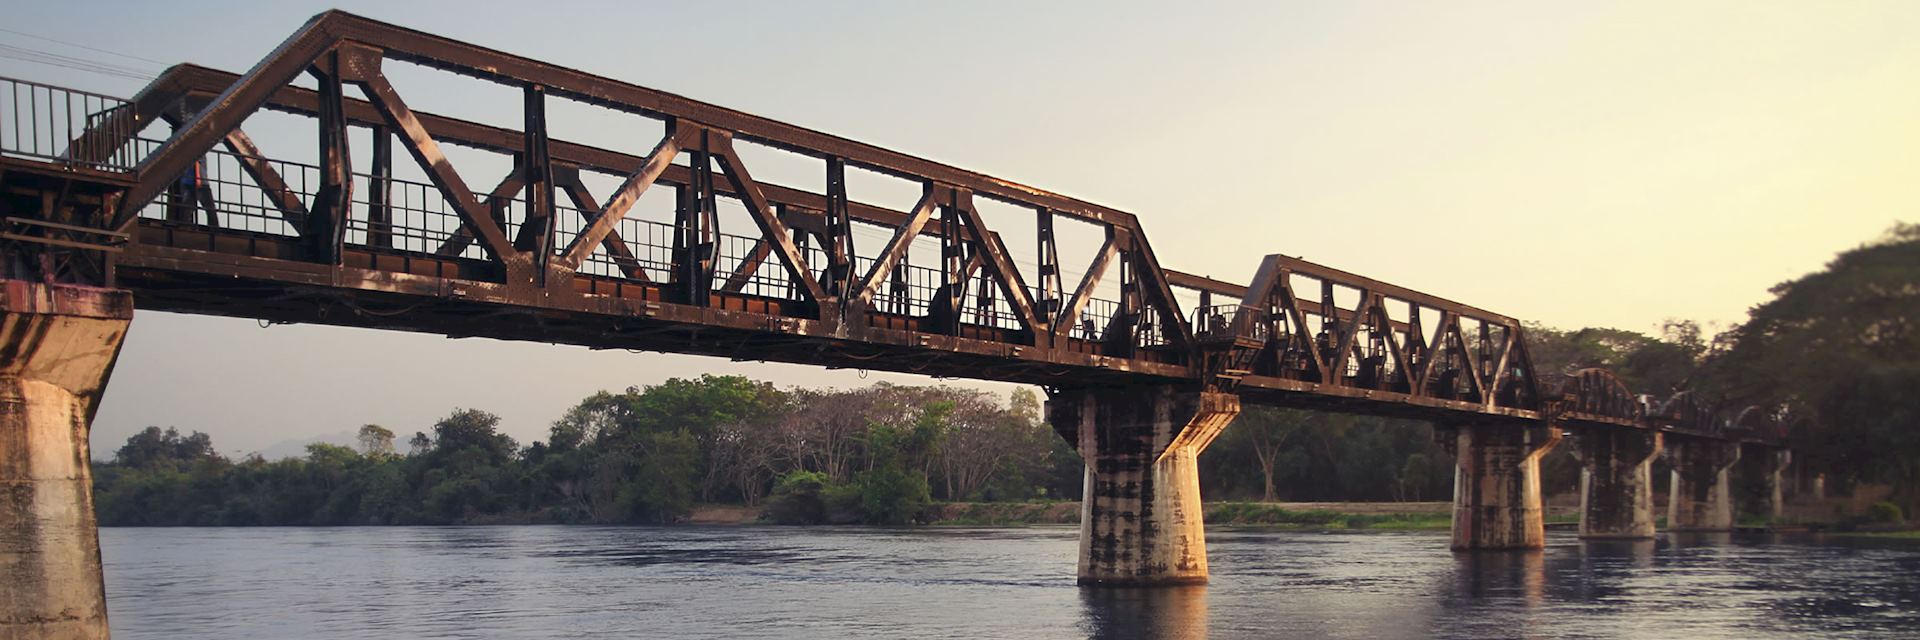 The infamous Bridge over the River Kwai